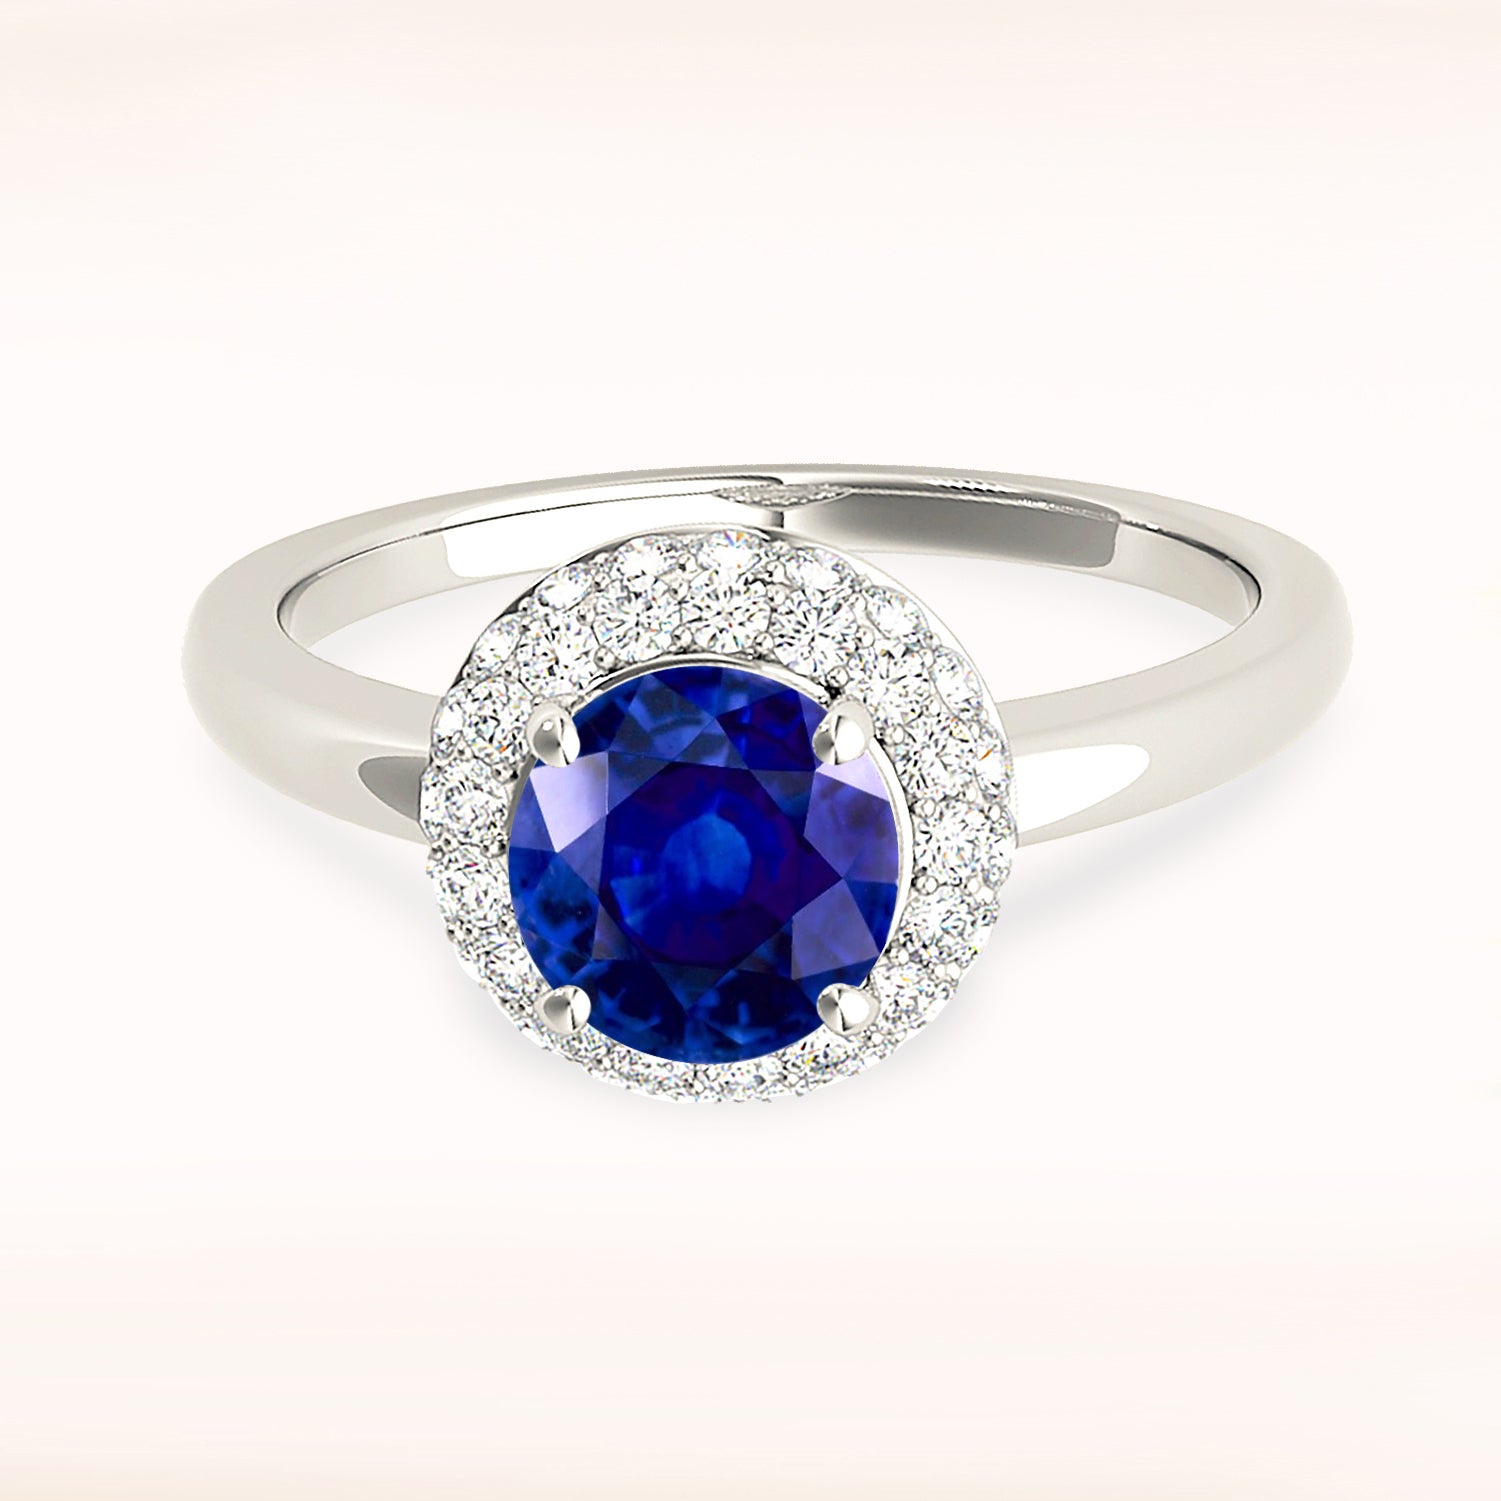 1.35 ct. Genuine Blue Sapphire Solitaire Halo Ring With 0.40 ctw. Pave Set Side Diamonds-in 14K/18K White, Yellow, Rose Gold and Platinum - Christmas Jewelry Gift -VIRABYANI